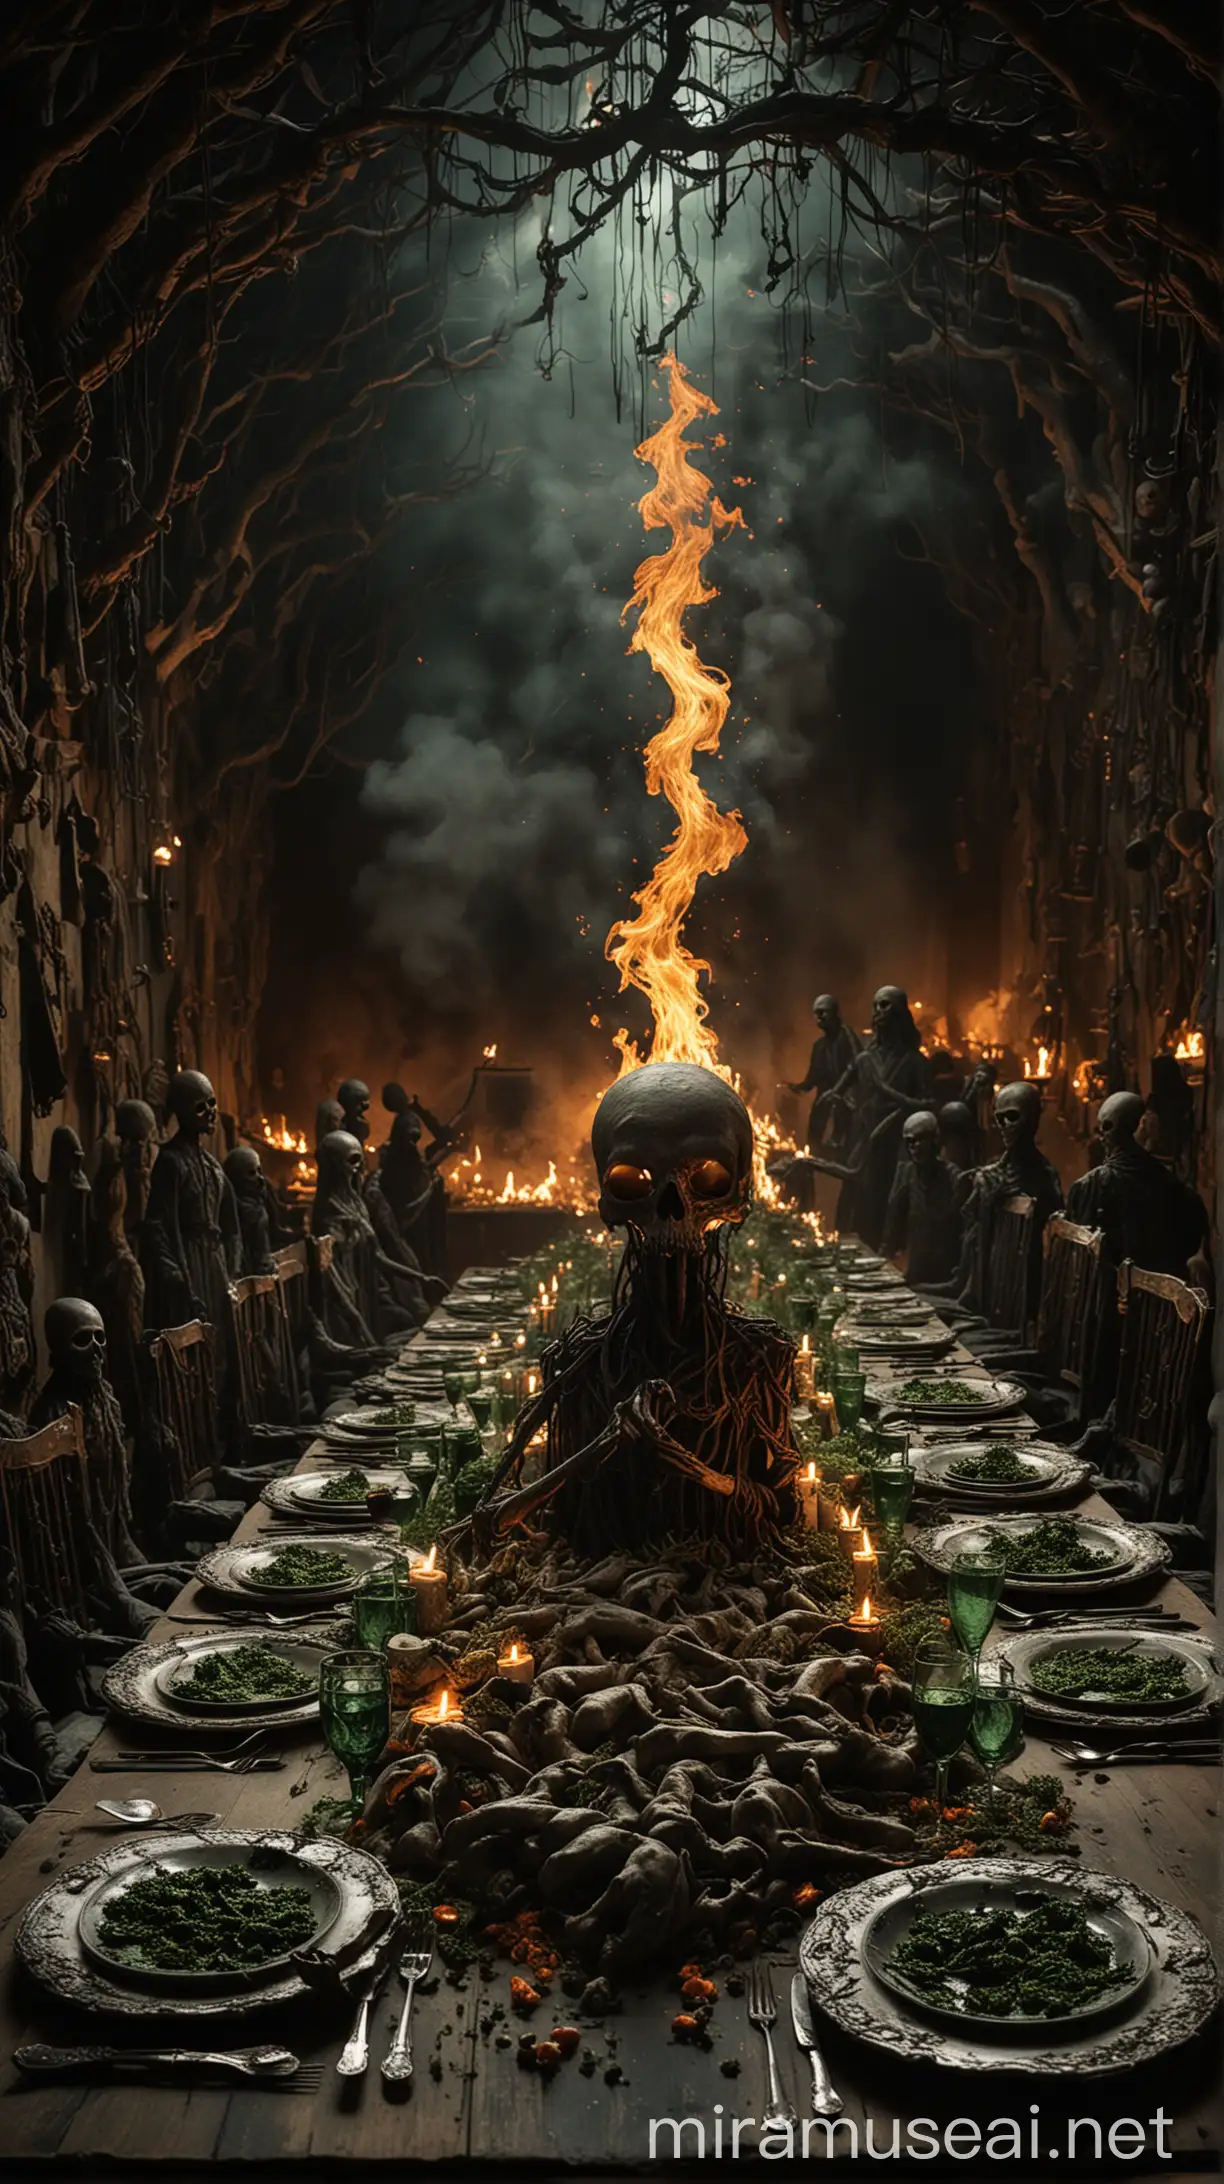 The Banquet of the Damned A Haunting Scene of Desperation and Decay